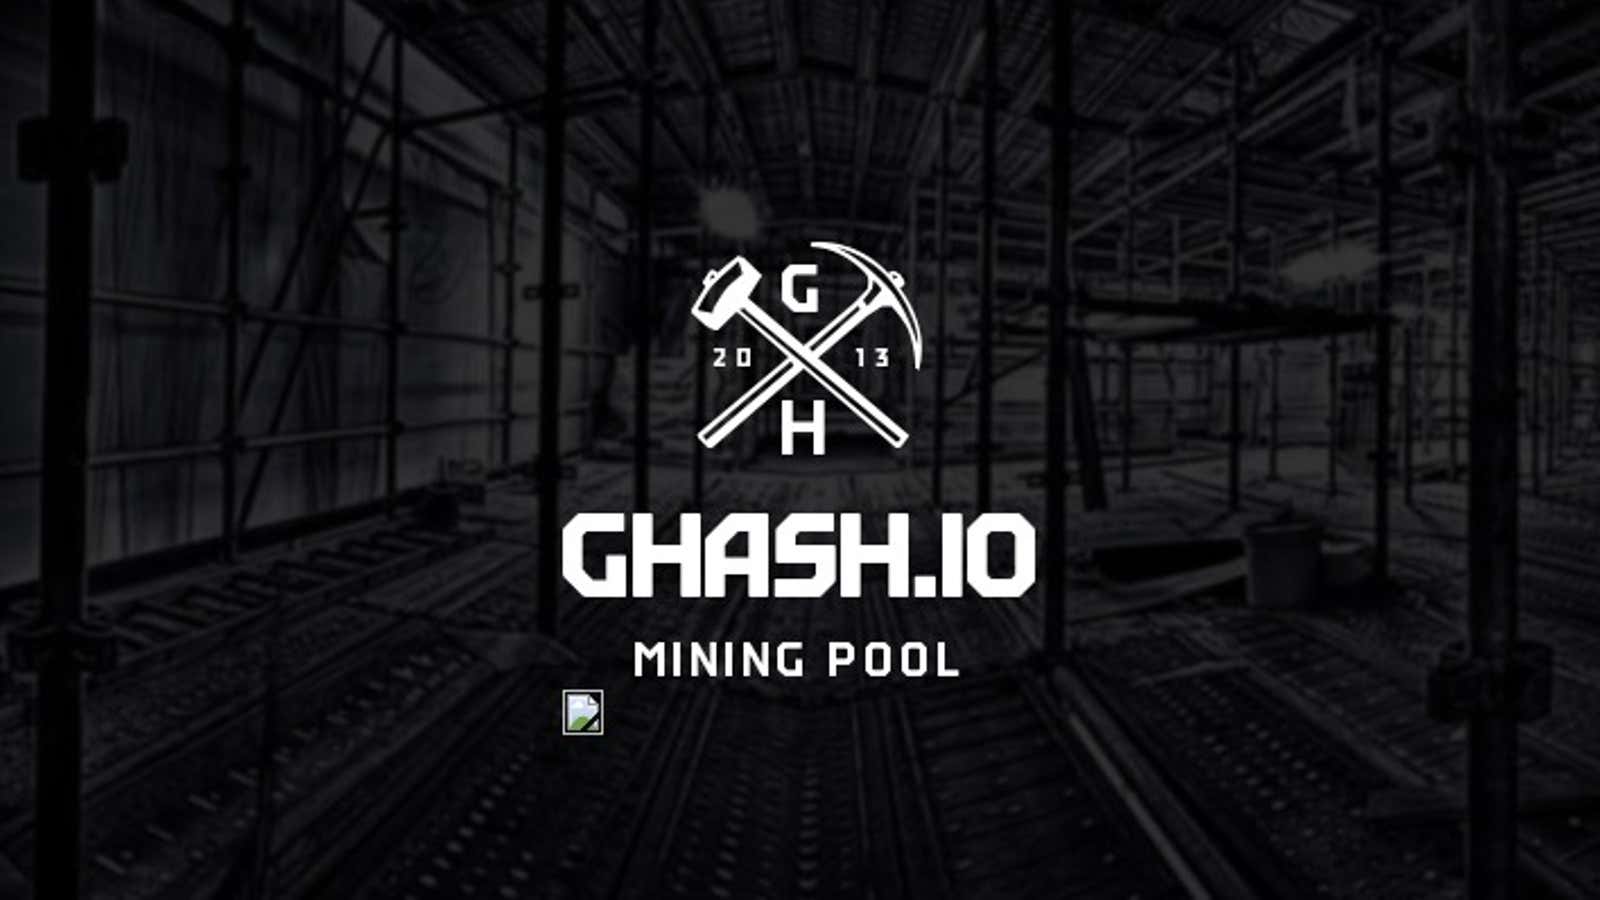 At 3AM on January 9 2014, Ghash.io came close to controlling the majority of the world’s bitcoin mining capacity—with potentially disastrous consequences.